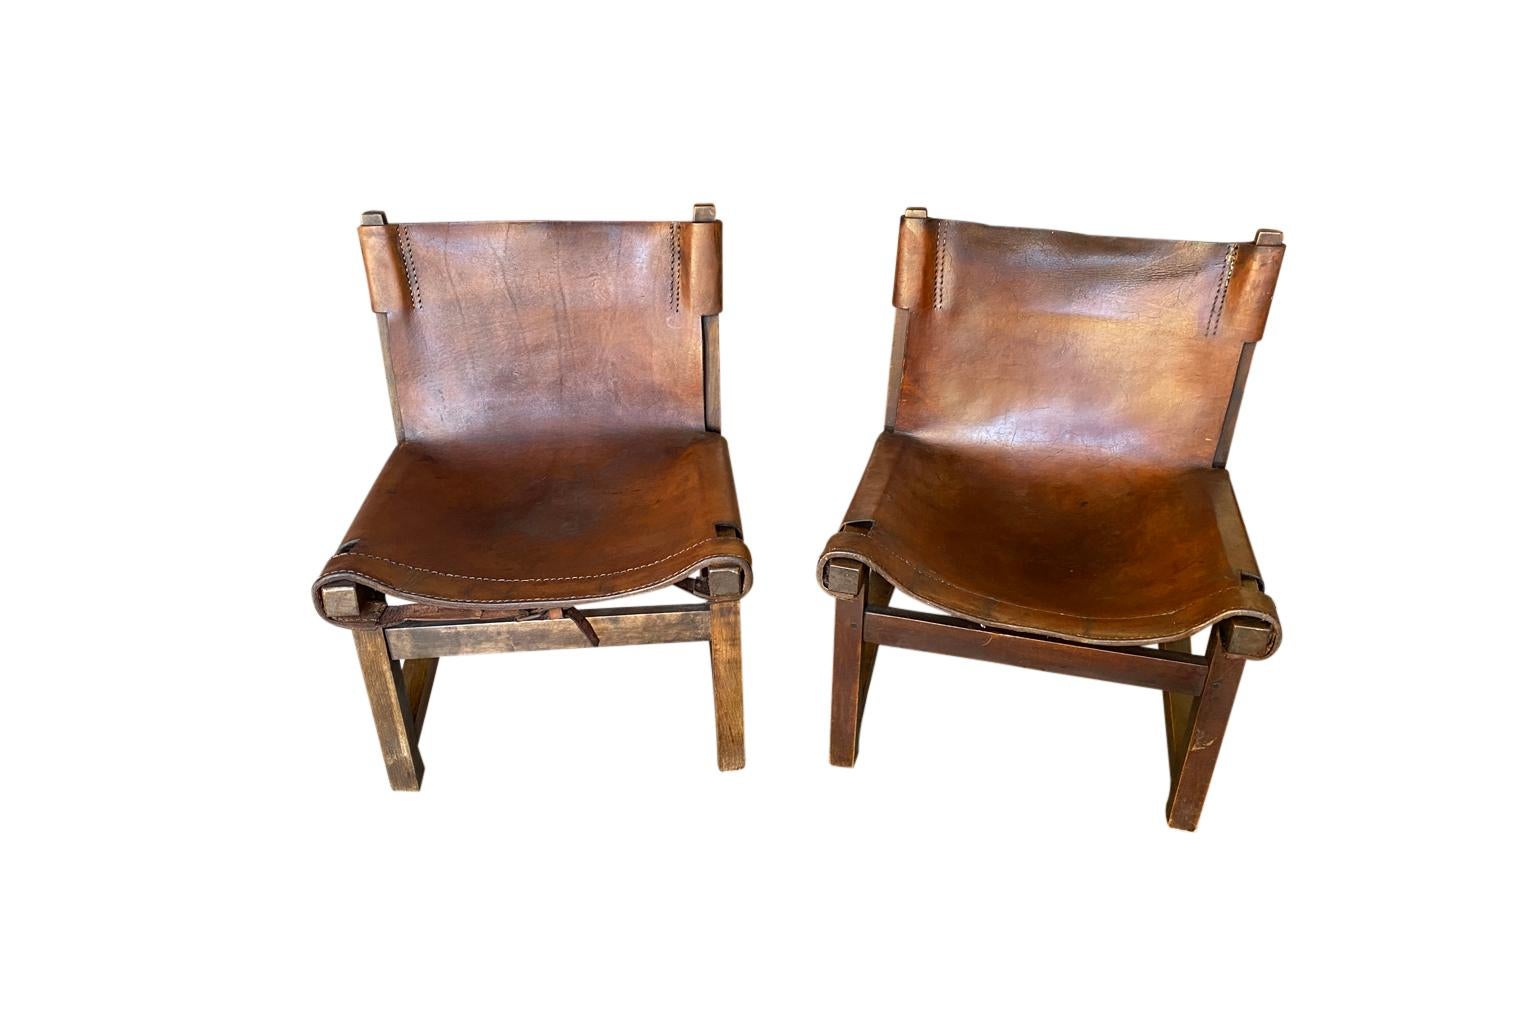 A very charming pair of 19th century low chairs soundly constructed from leather and wood. Very sturdy and comfortable. Great patina. The seat height is 12 1/4